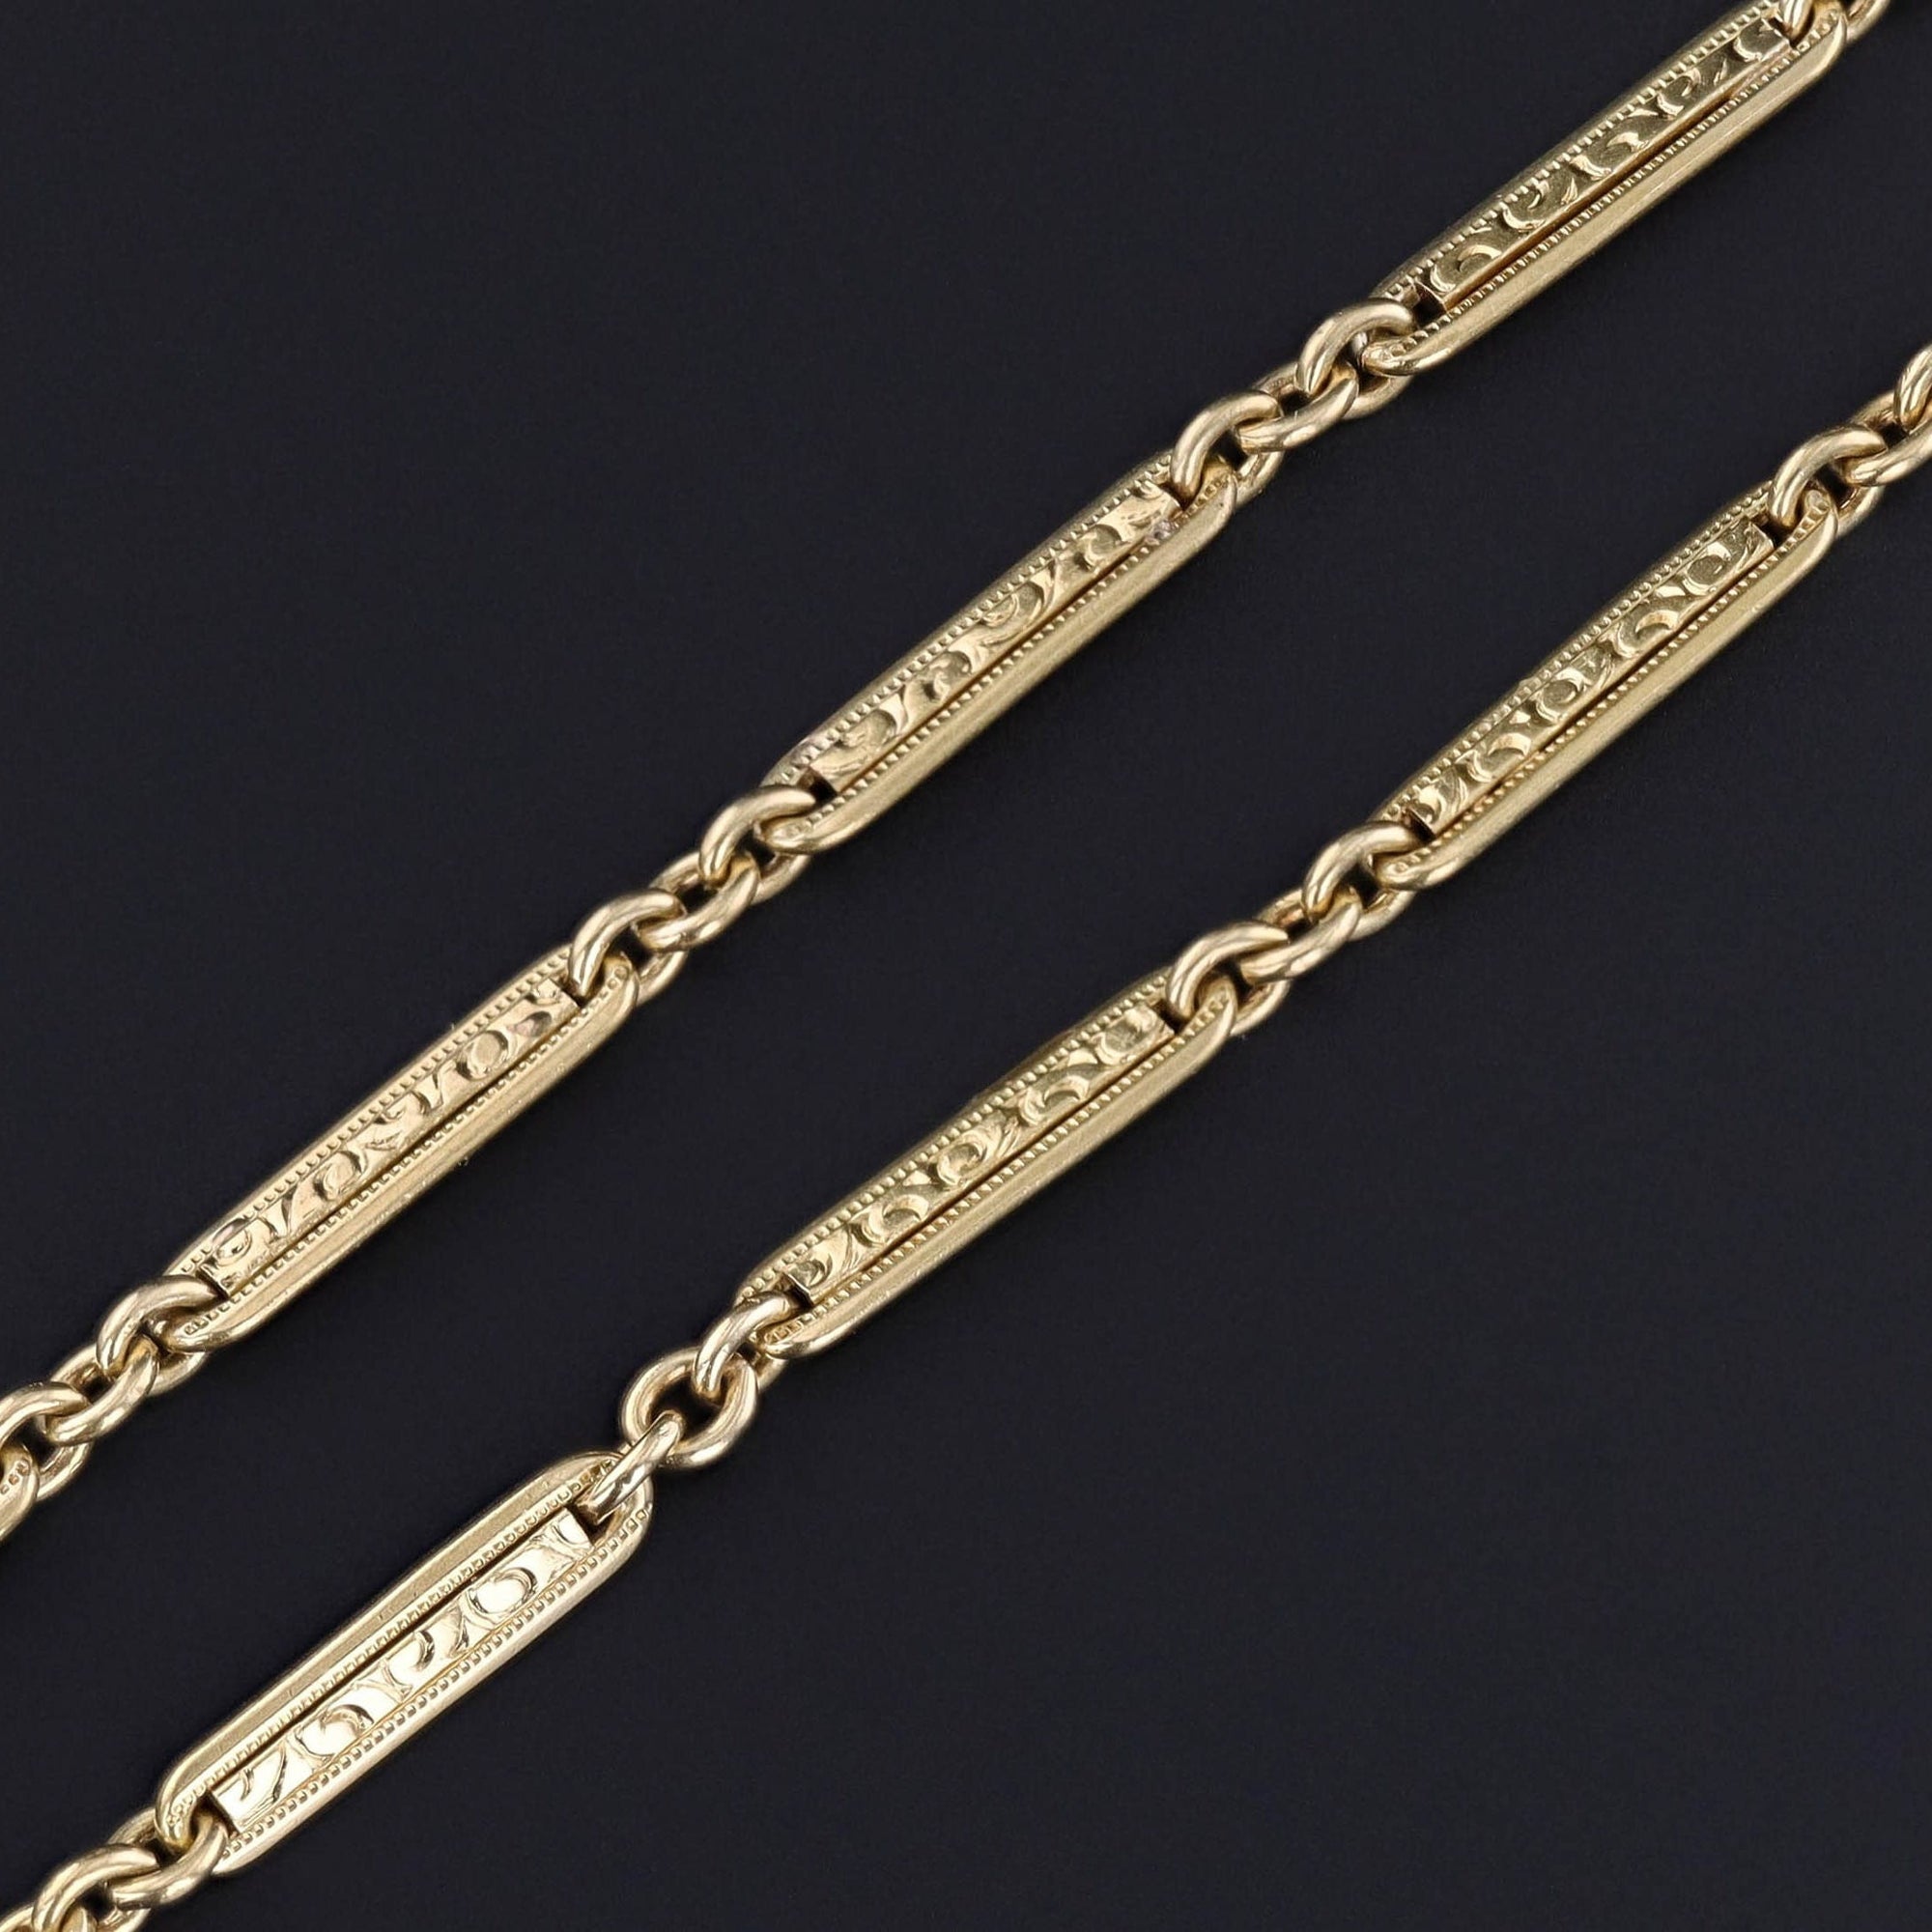 Antique Watch Chain of 14k Gold